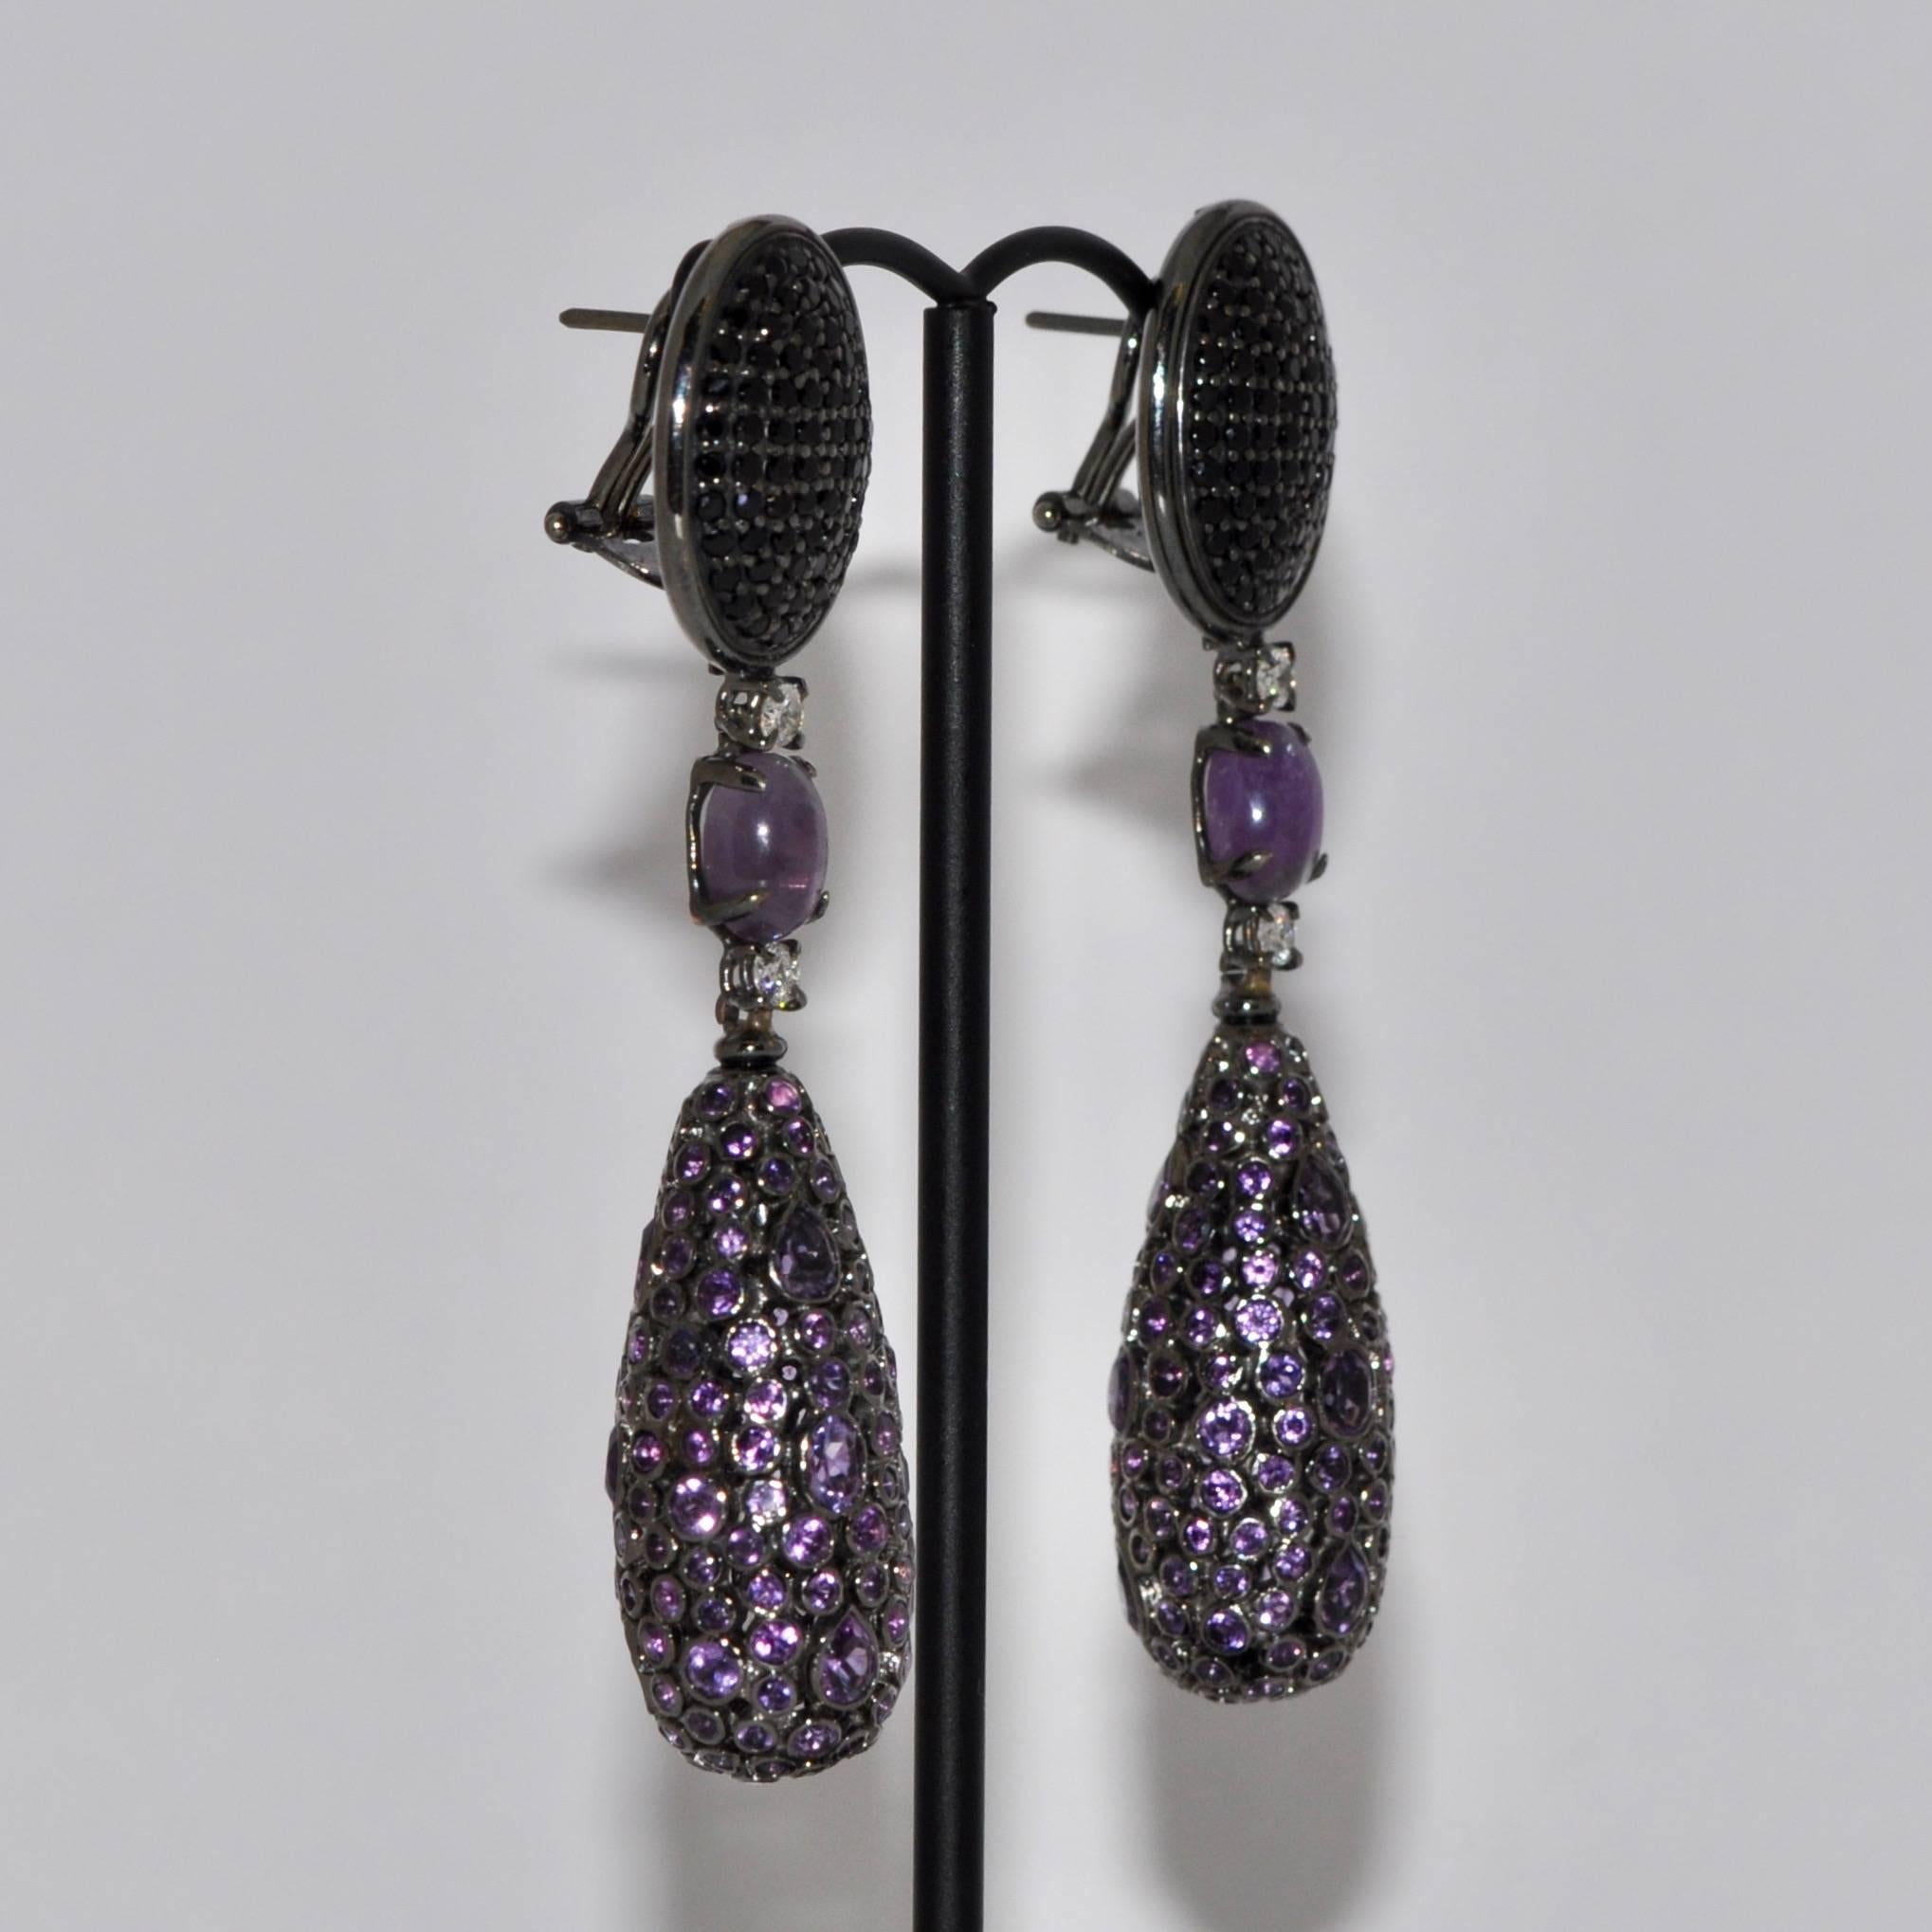 Discover this Amethyst, Spinel and White Diamonds Silver and Black Gold Chandelier Earrings.
Amethyst
Black Spinel 
White Diamonds 0.28 Carat
Silver 
Black Gold 18 Carat